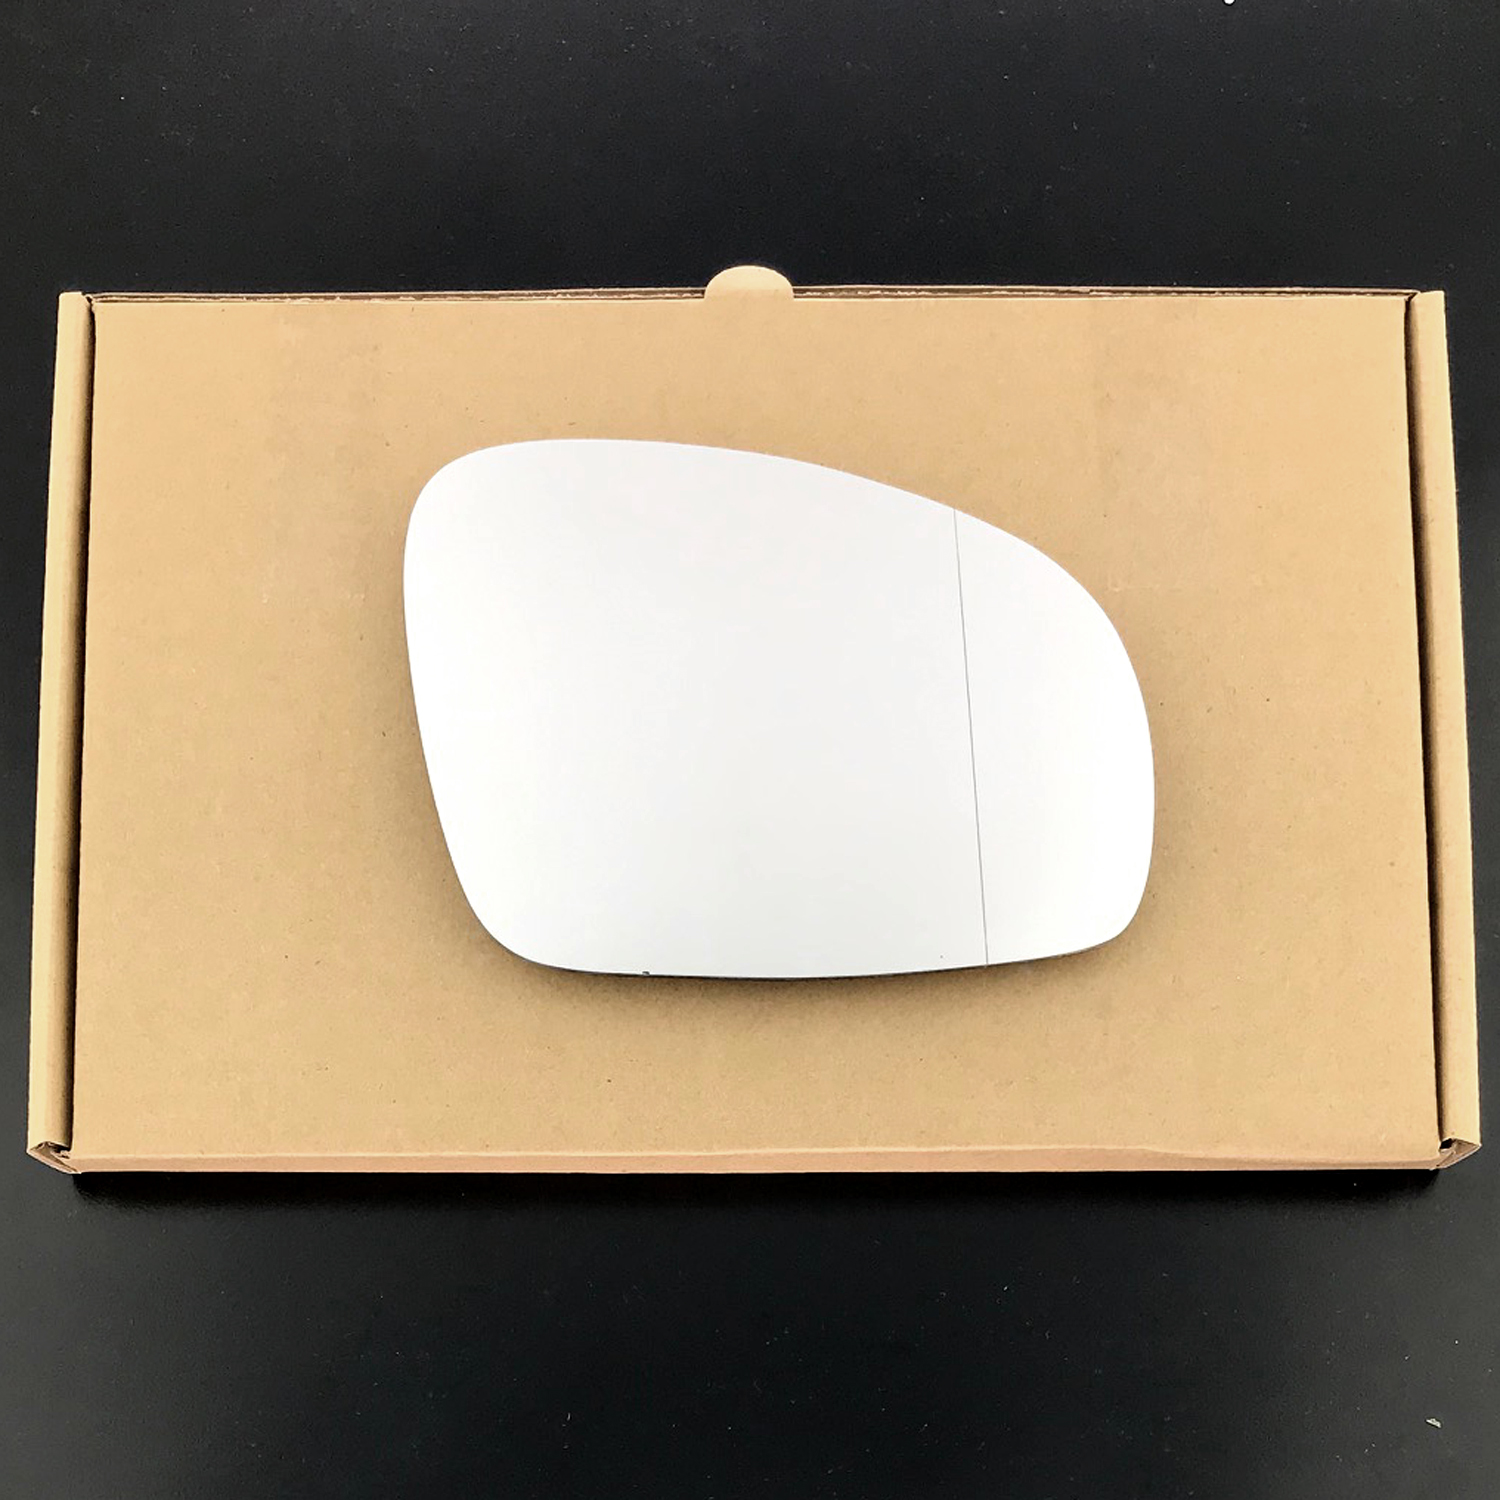 Skoda Fabia Wing Mirror Glass RIGHT HAND ( UK Driver Side ) 2007 to 2014 – Wide Angle Wing Mirror